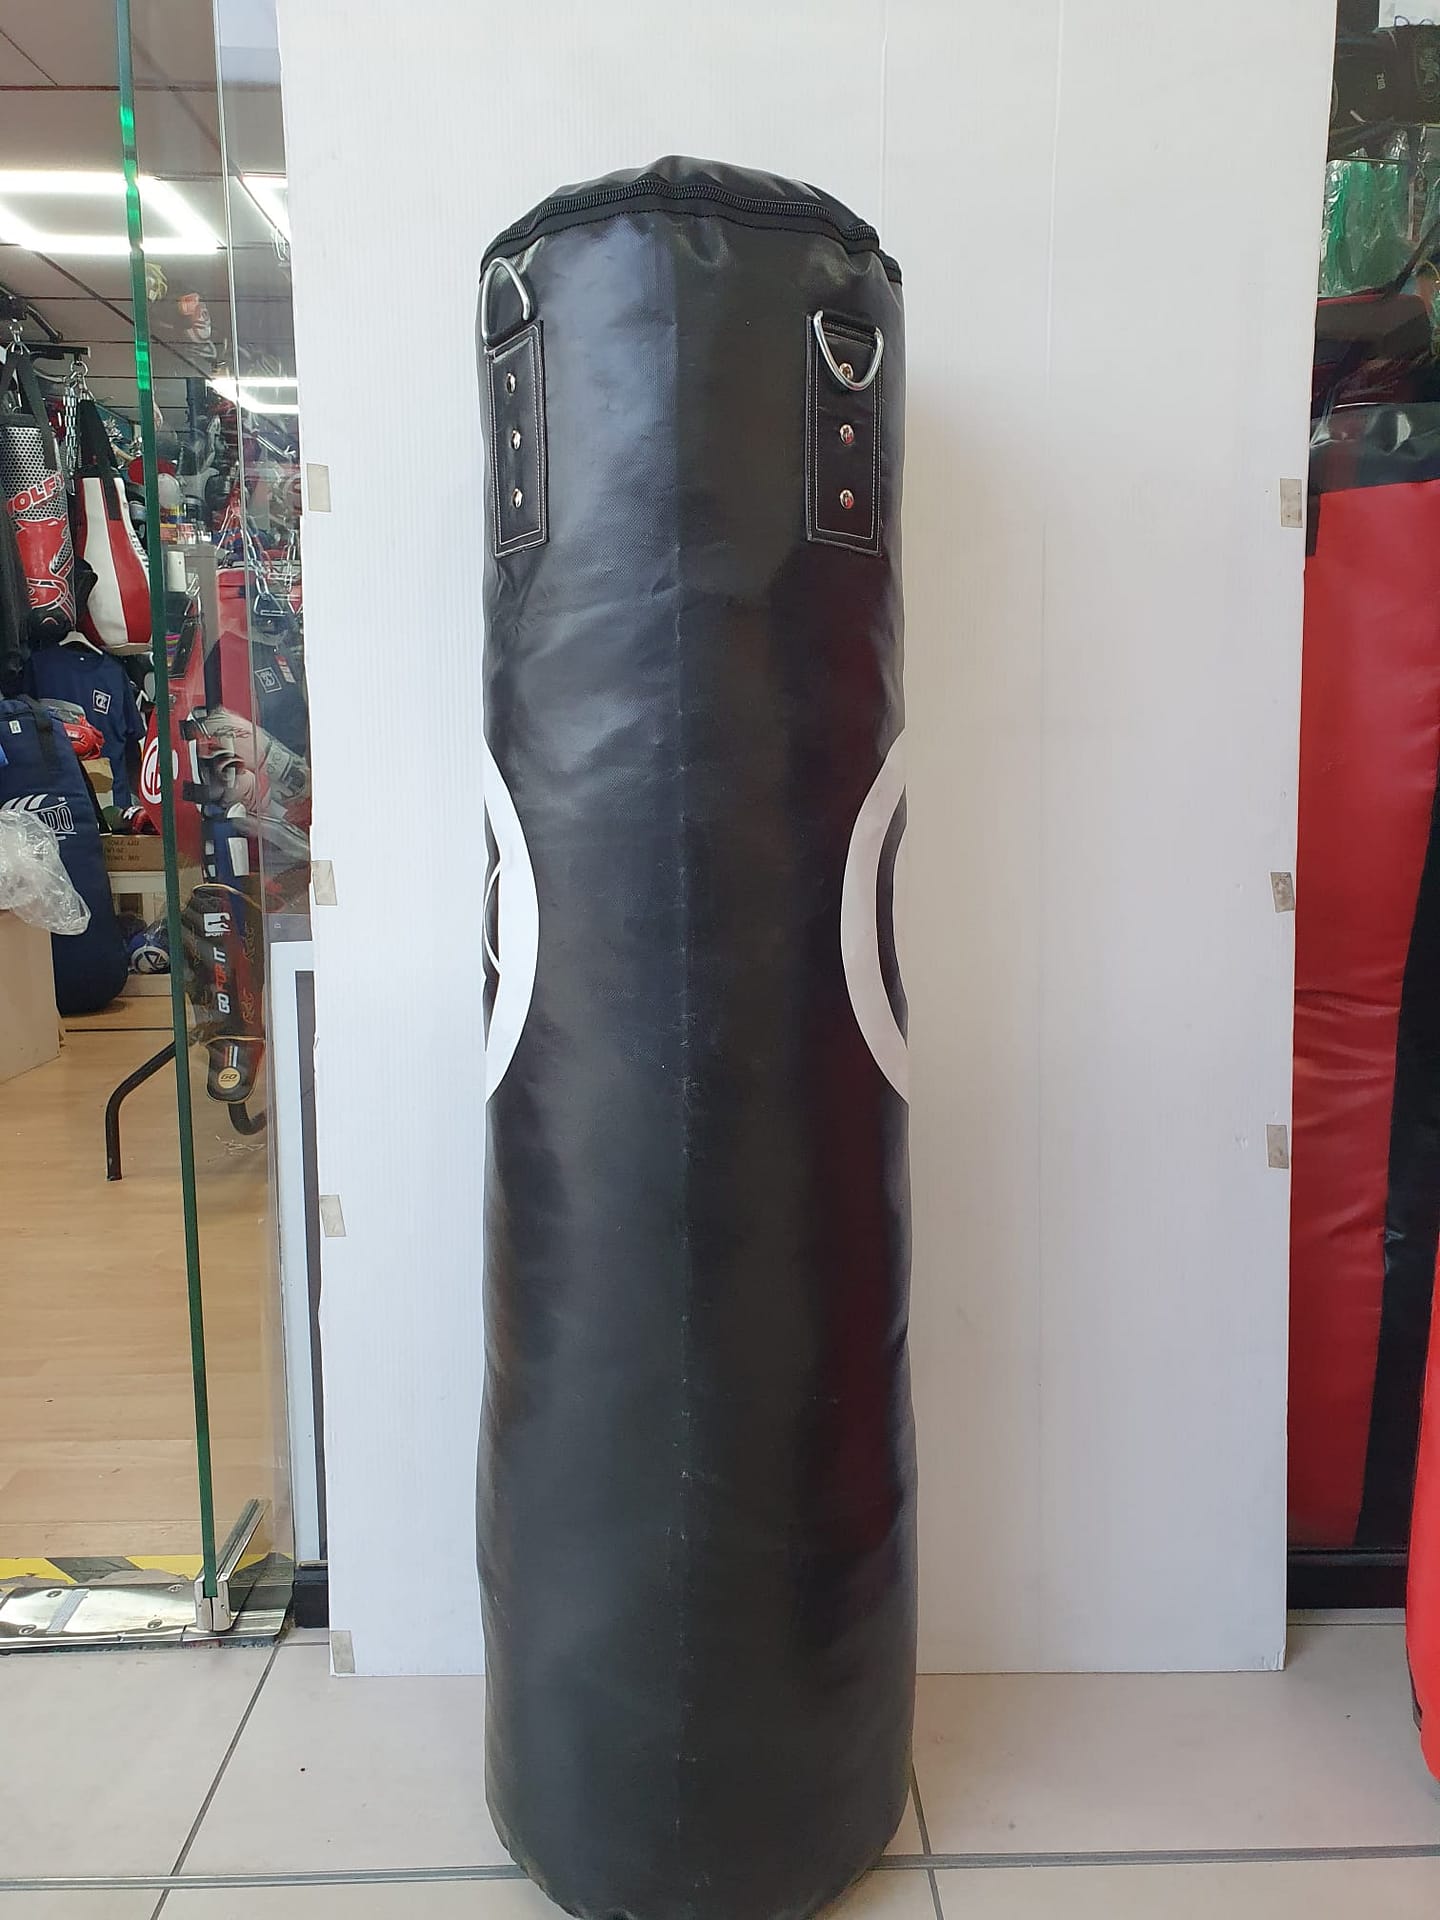 Gallant Boxing Punching Black Bag 4ft, For training MMA, Fitness ...